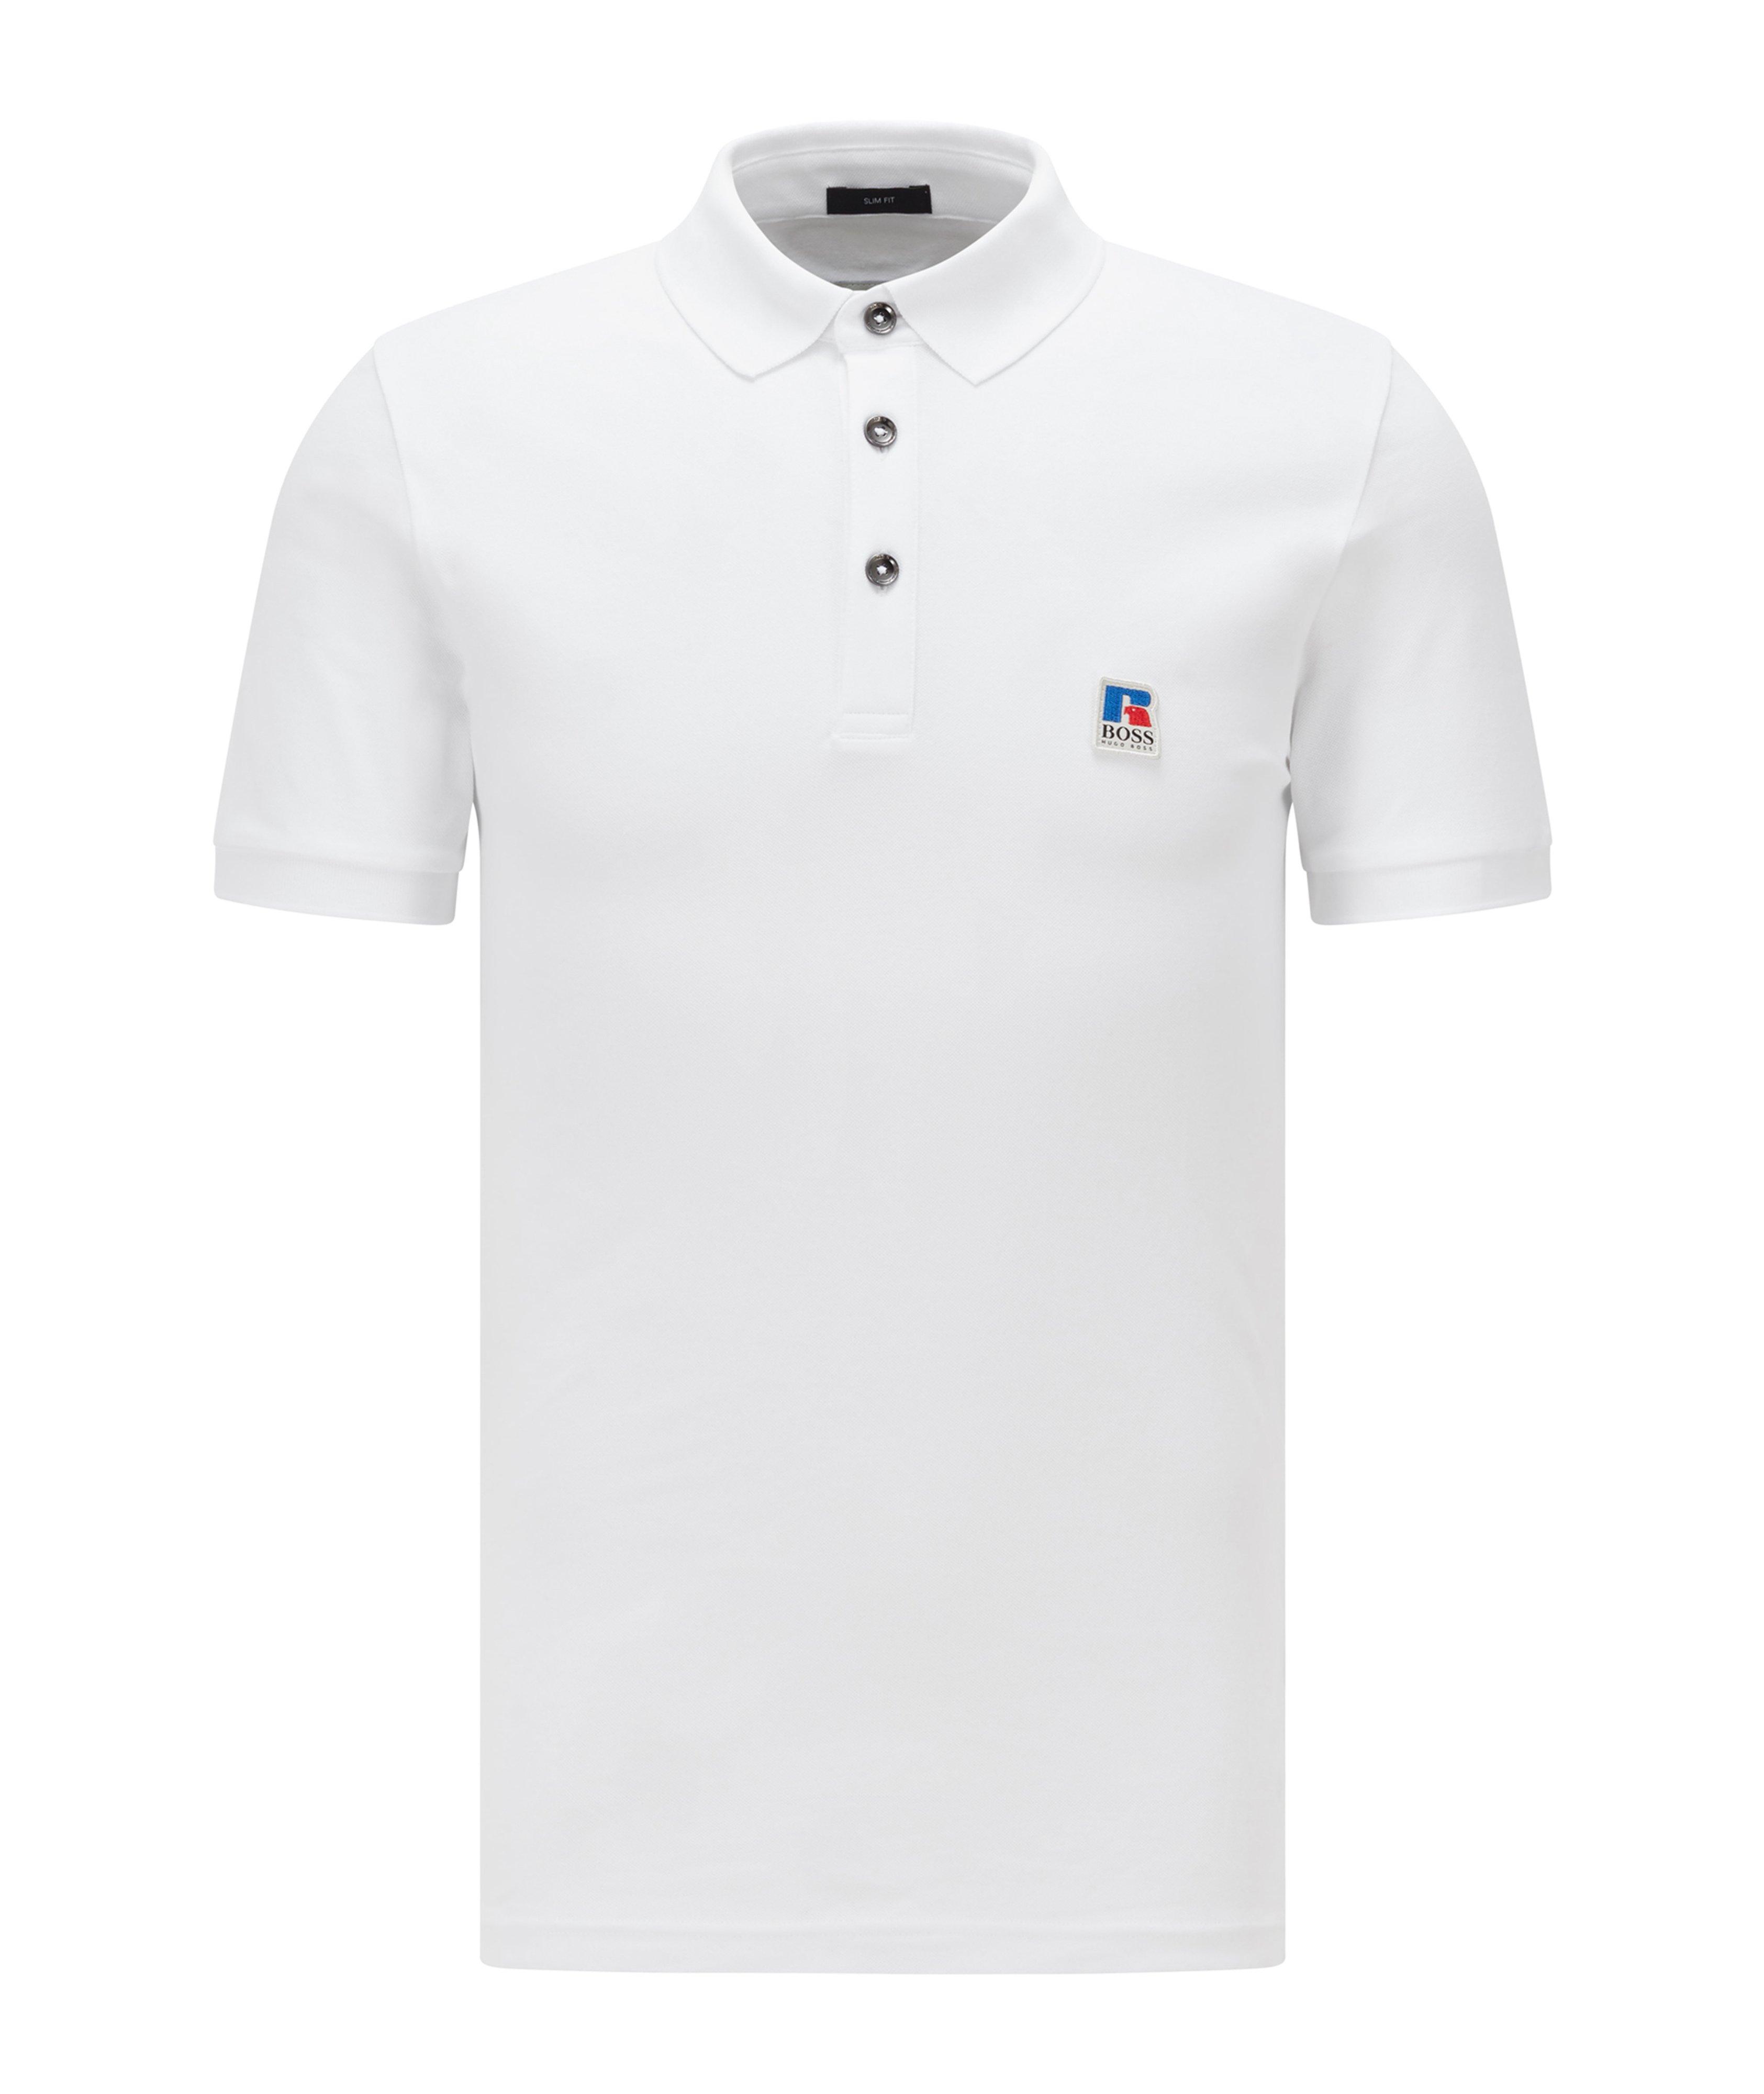 BOSS x Russell Athletic Polo Shirt image 0